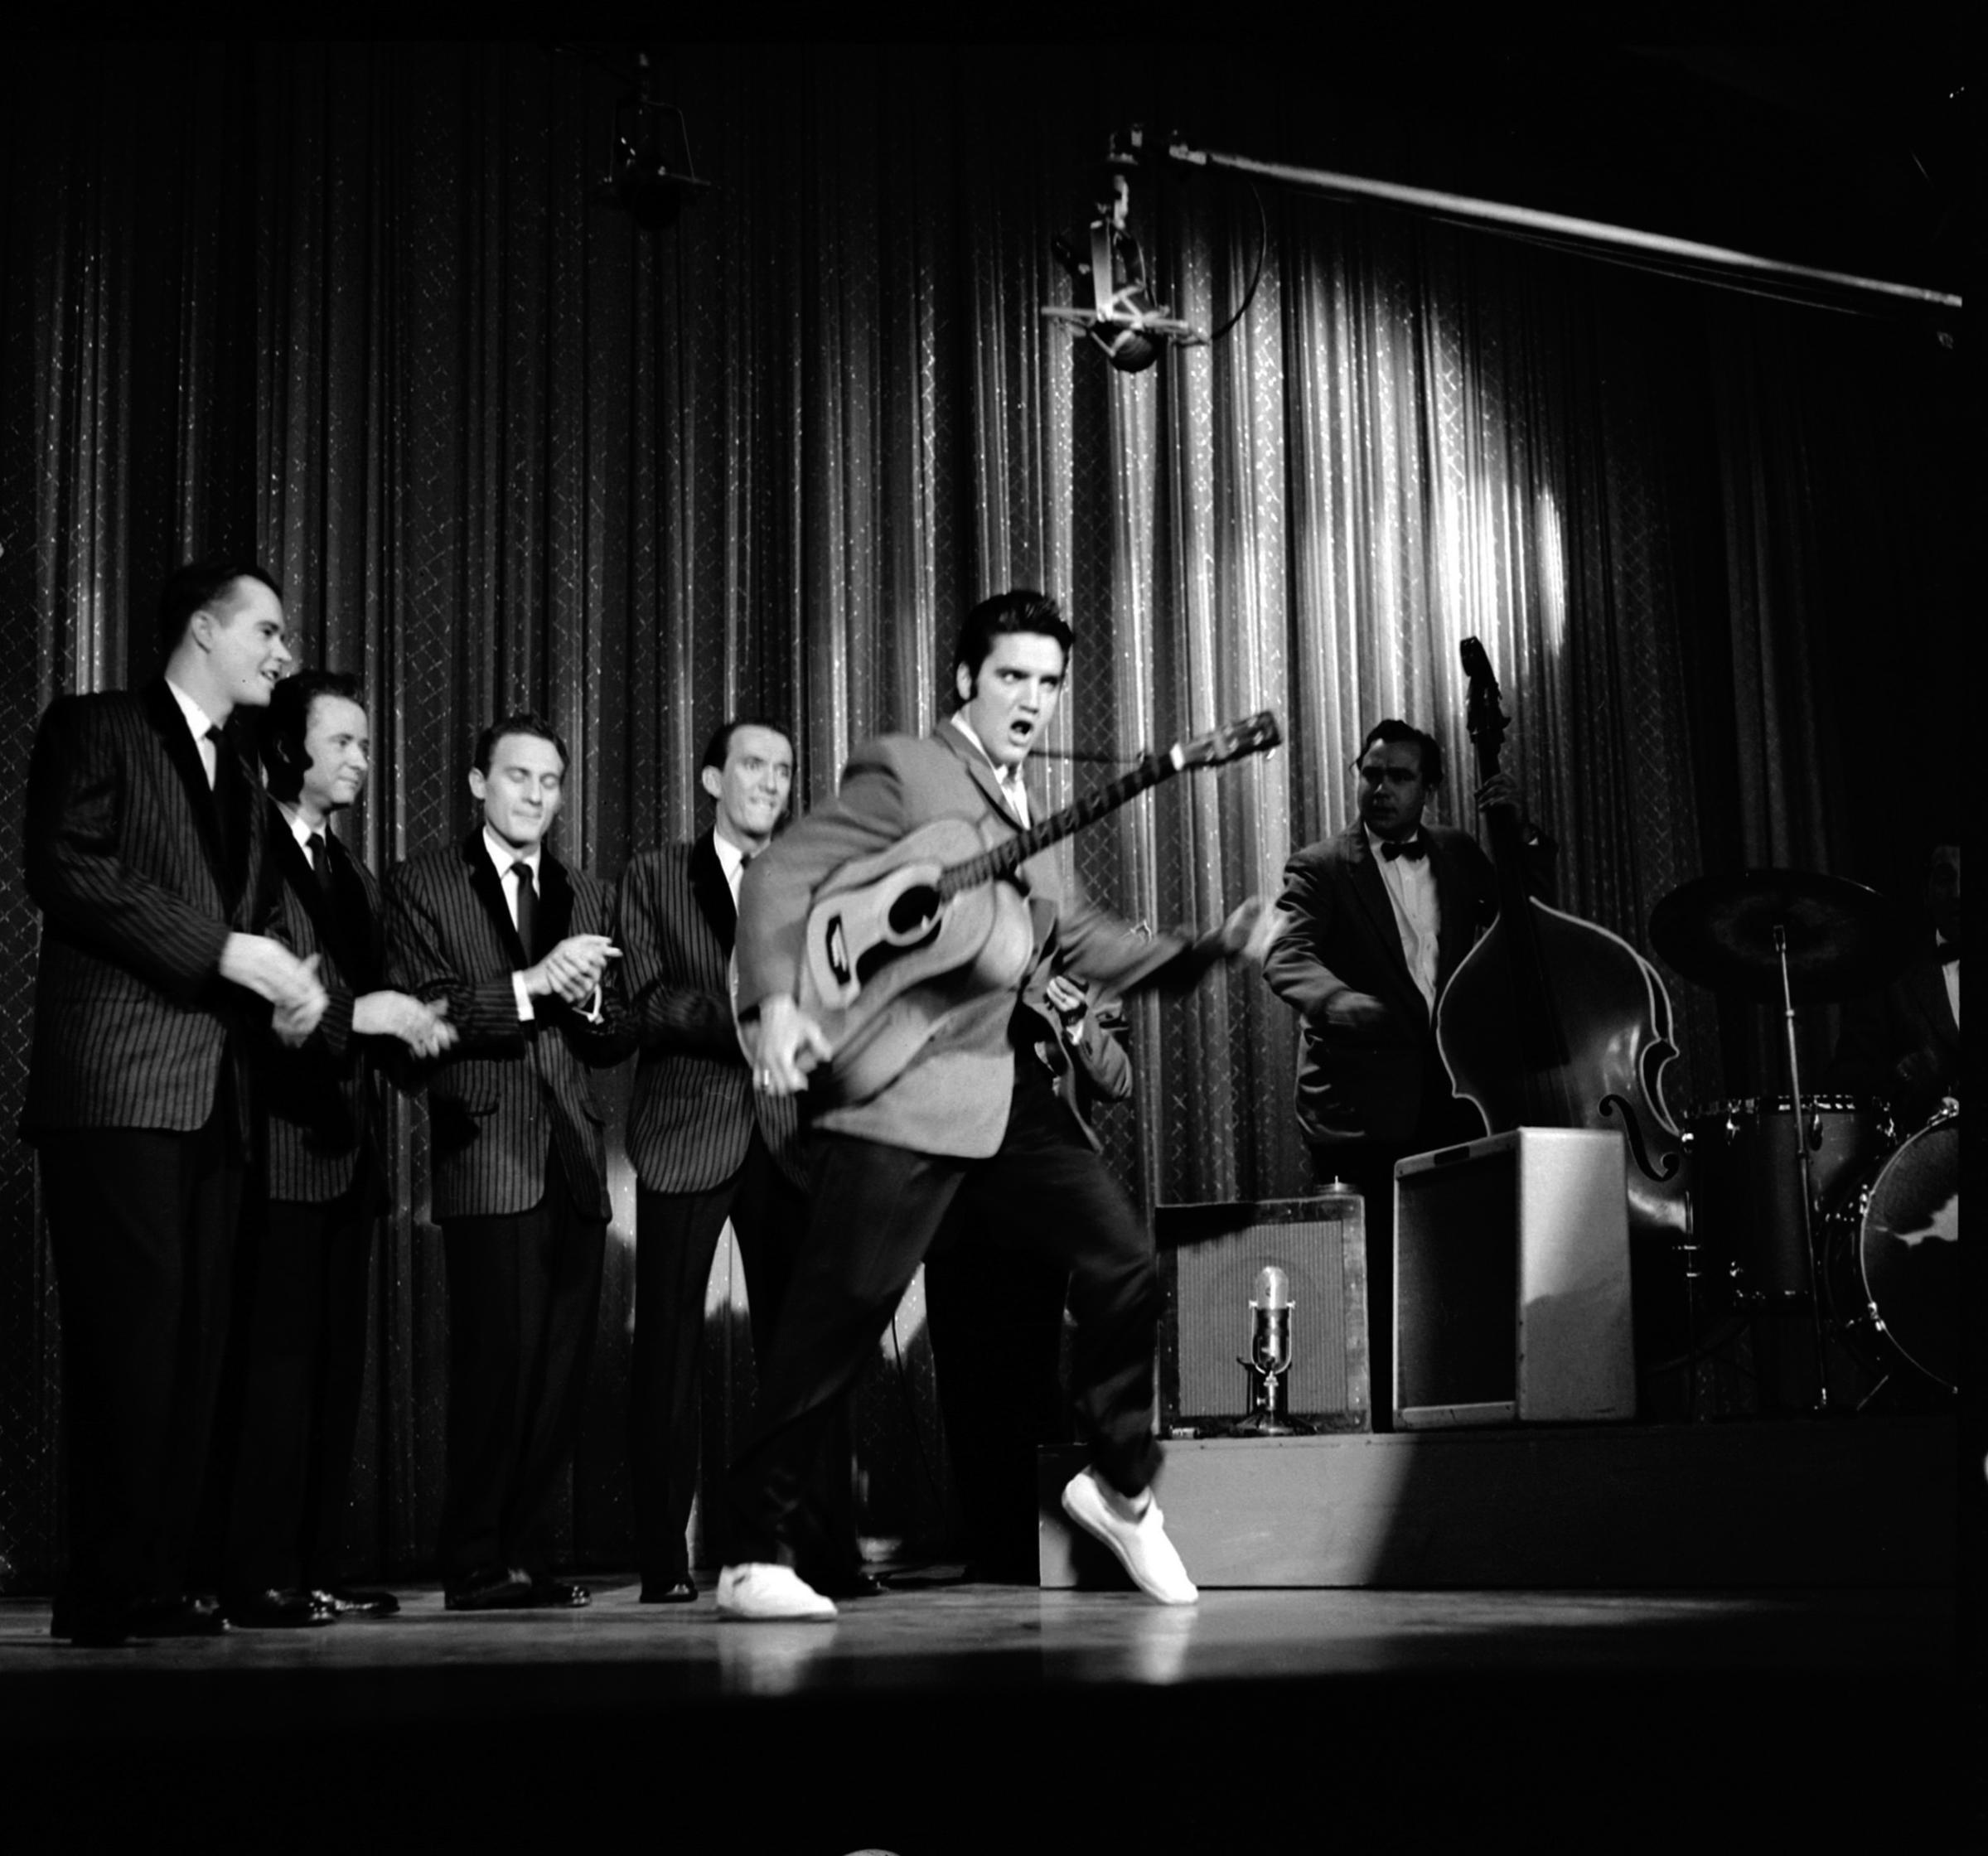 Elvis swivels his hips as he performs with his band onstage during his second appearance on 'The Ed Sullivan Show,' New York, New York, October 28, 1956.